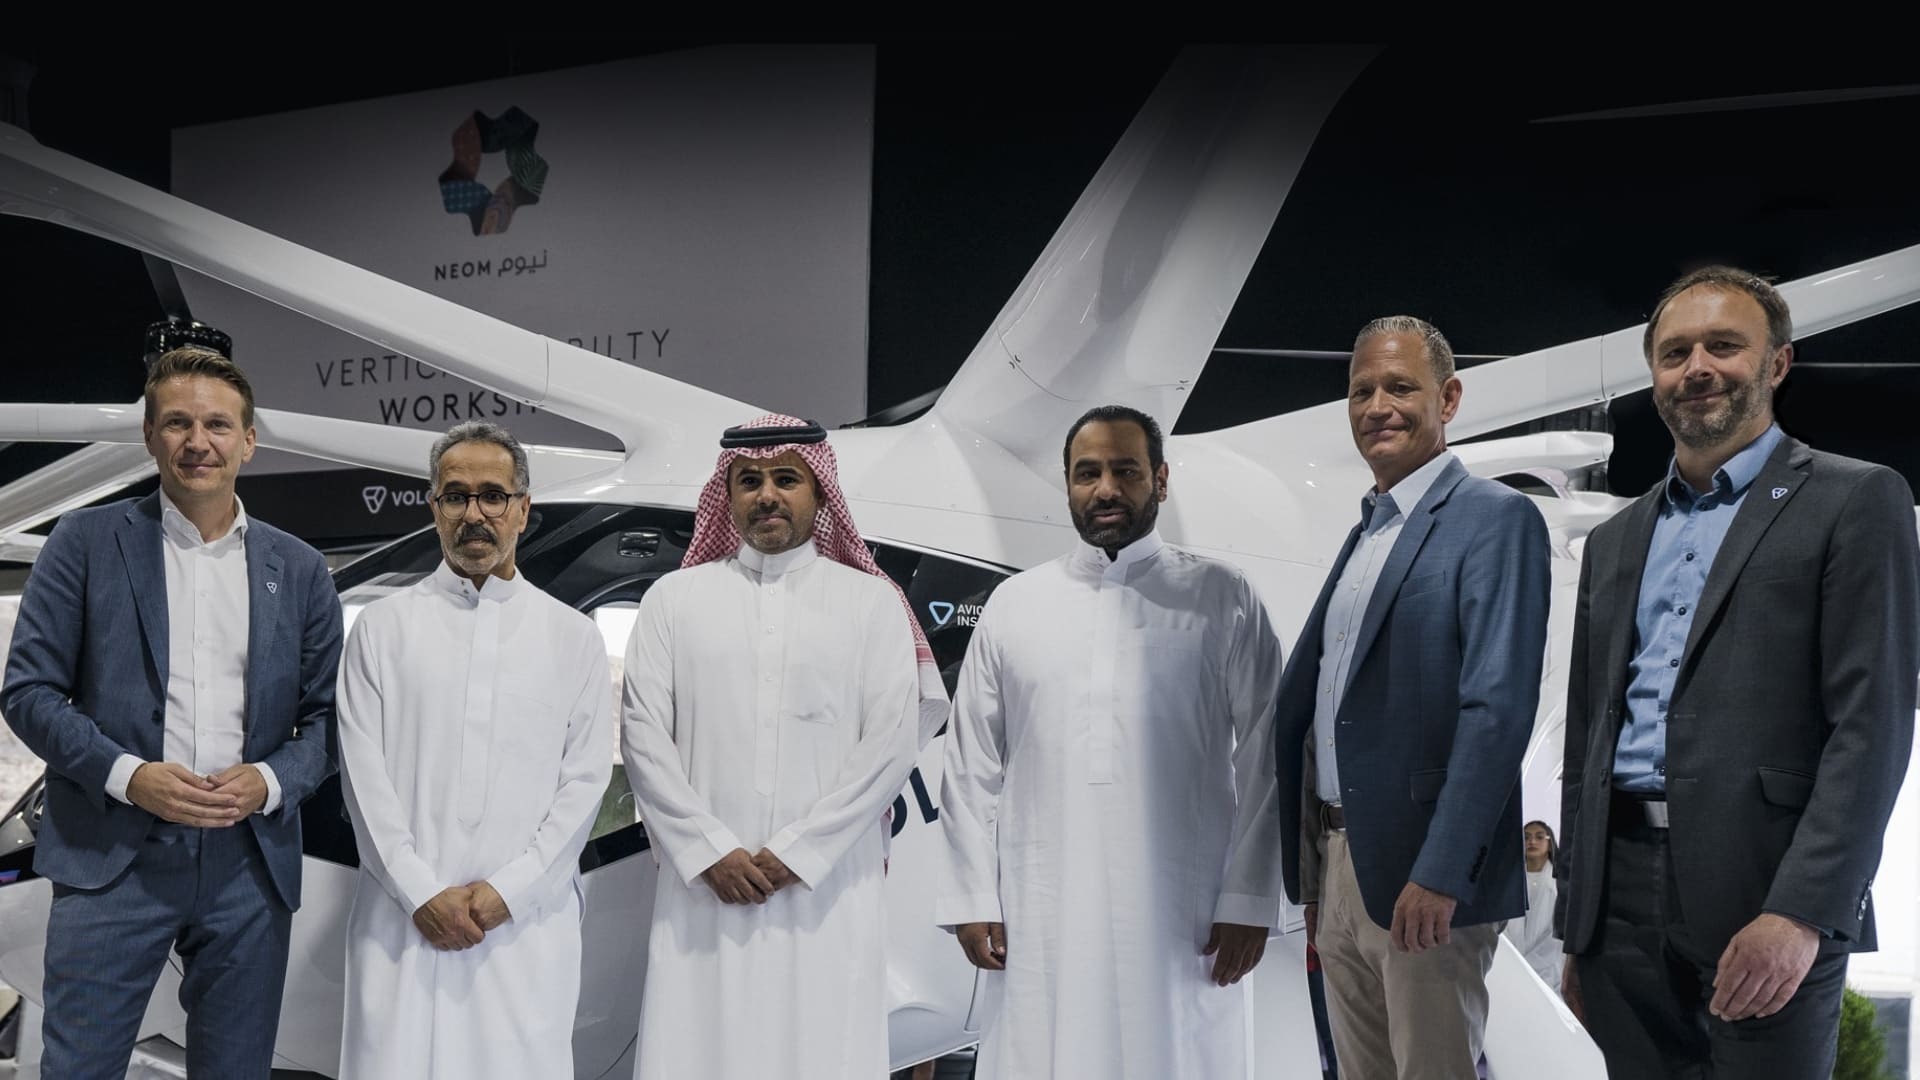 NEOM and Volocoptor have conducted the first electric air taxi flight in Saudi Arabia 